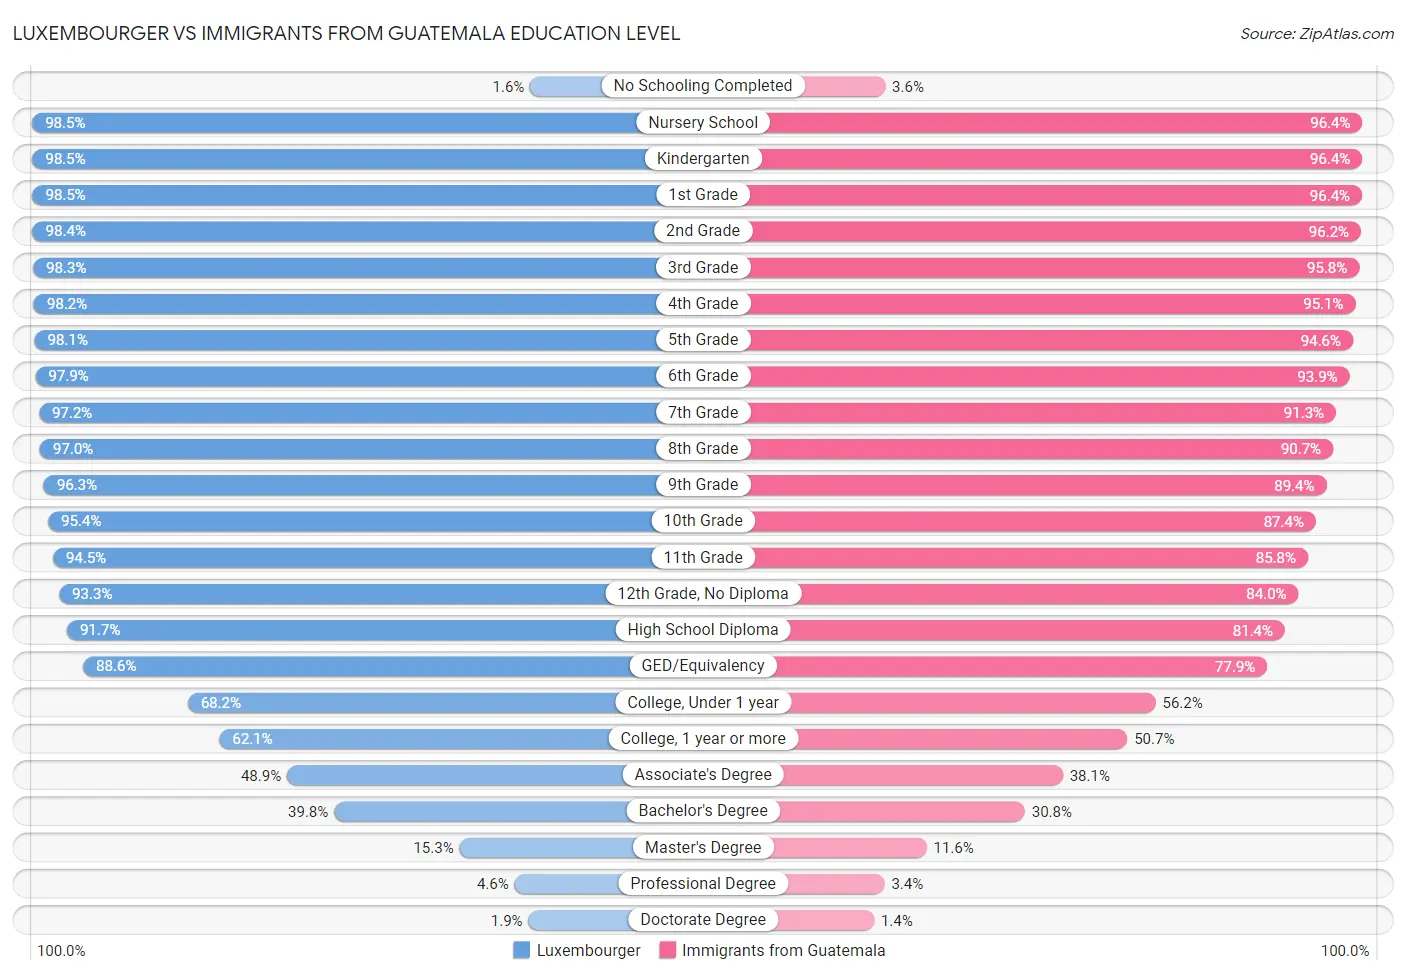 Luxembourger vs Immigrants from Guatemala Education Level